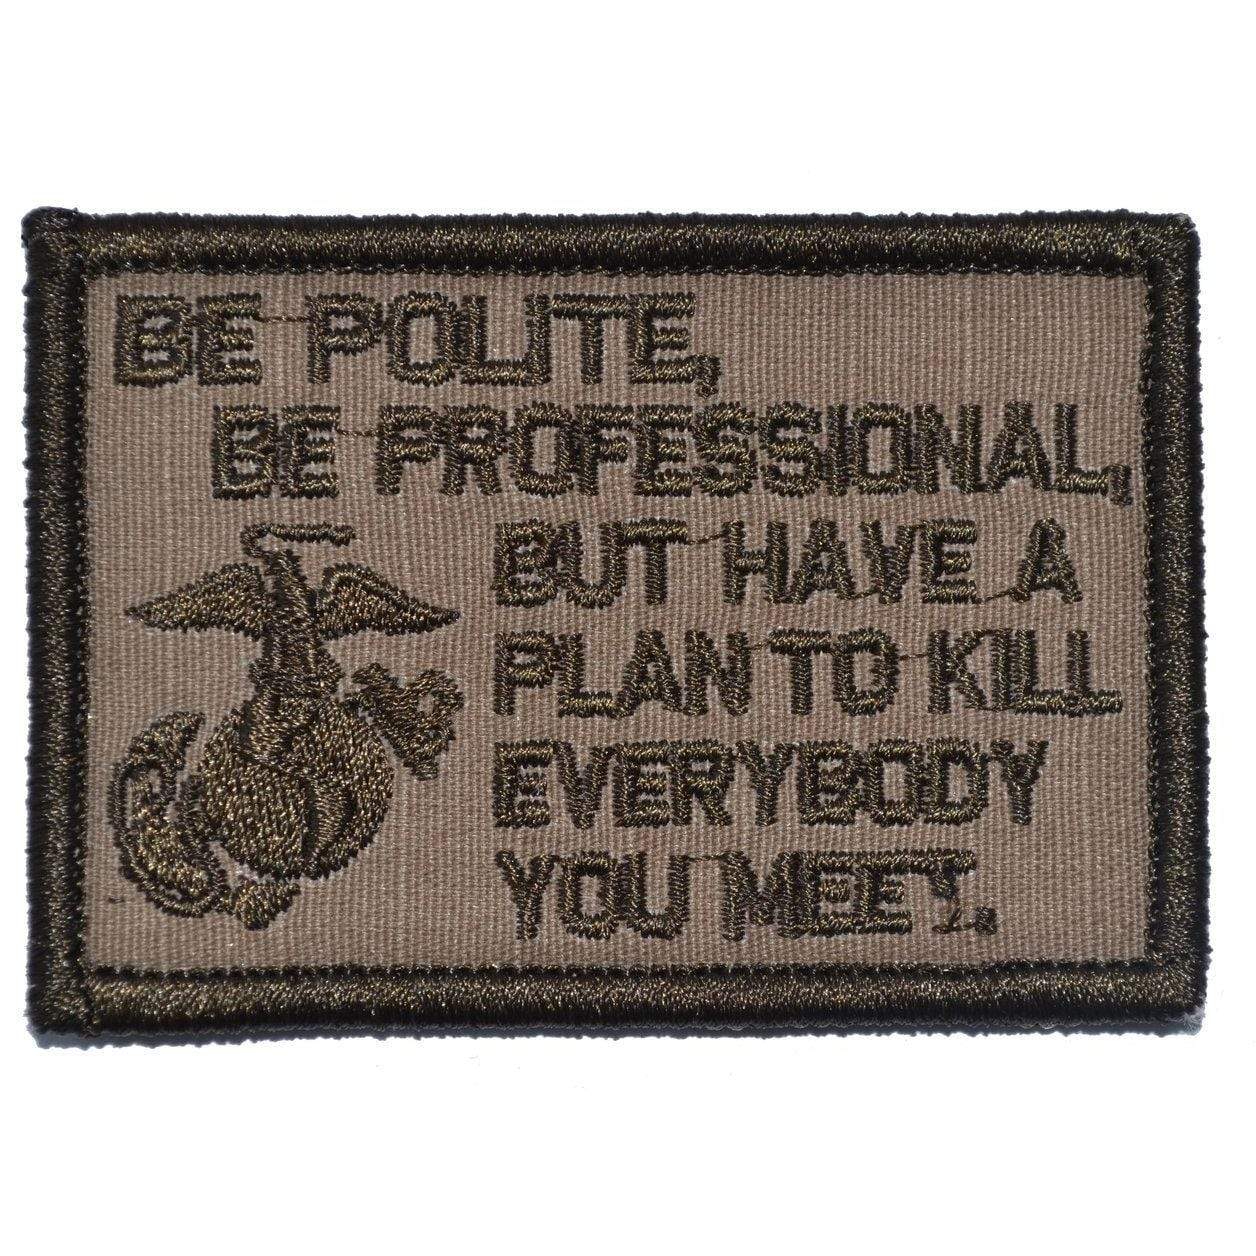 Tactical Gear Junkie Patches Coyote Brown Be Polite, Be Professional USMC Mattis Quote - 2x3 Patch